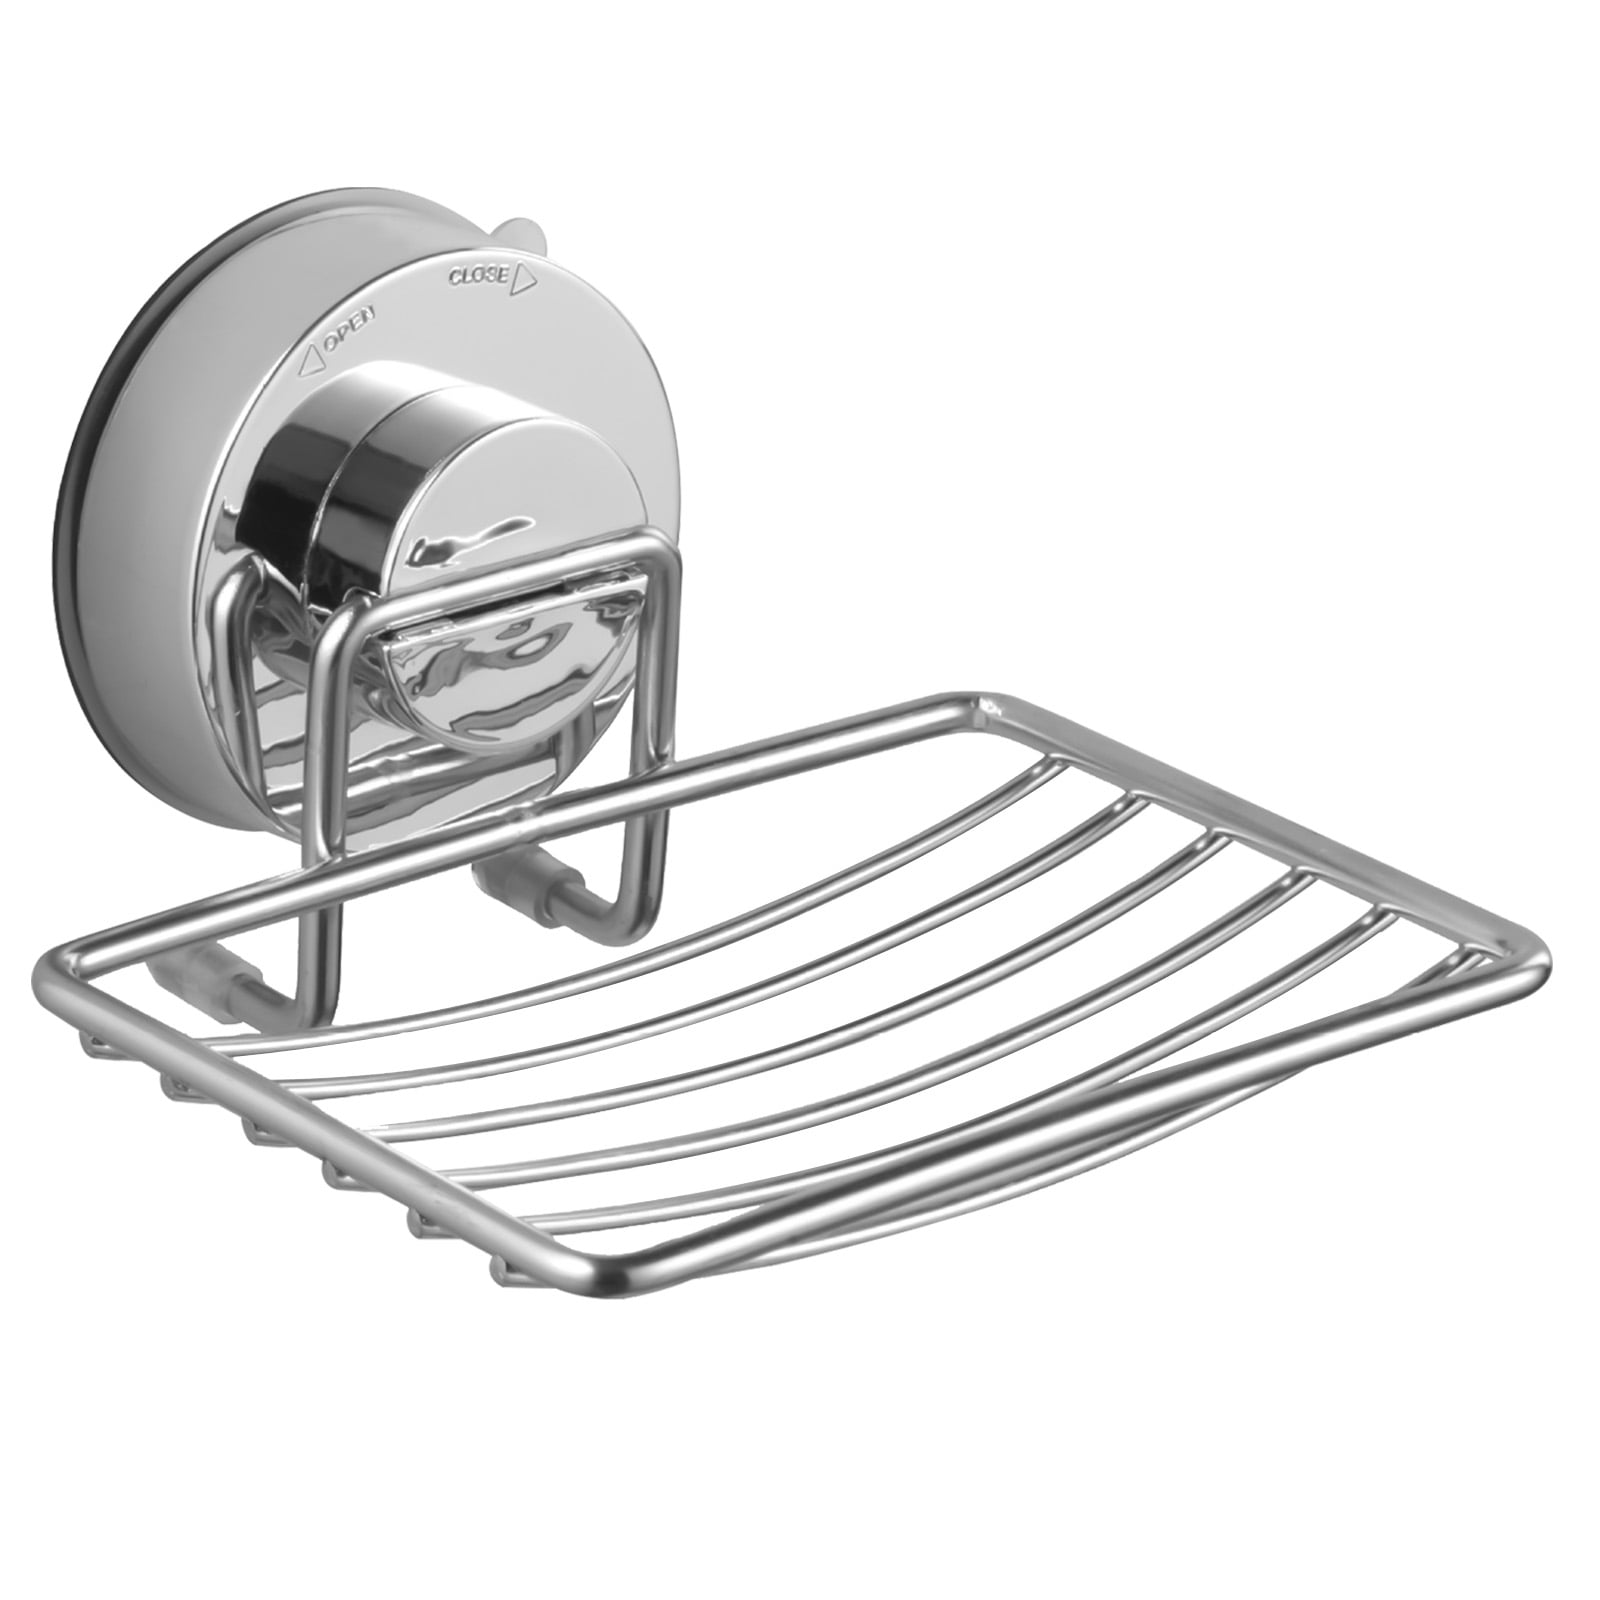 1pcs Stainless Steel Wall Mounted Shower Soap Holder Soap Dish Basket Tray Rack 